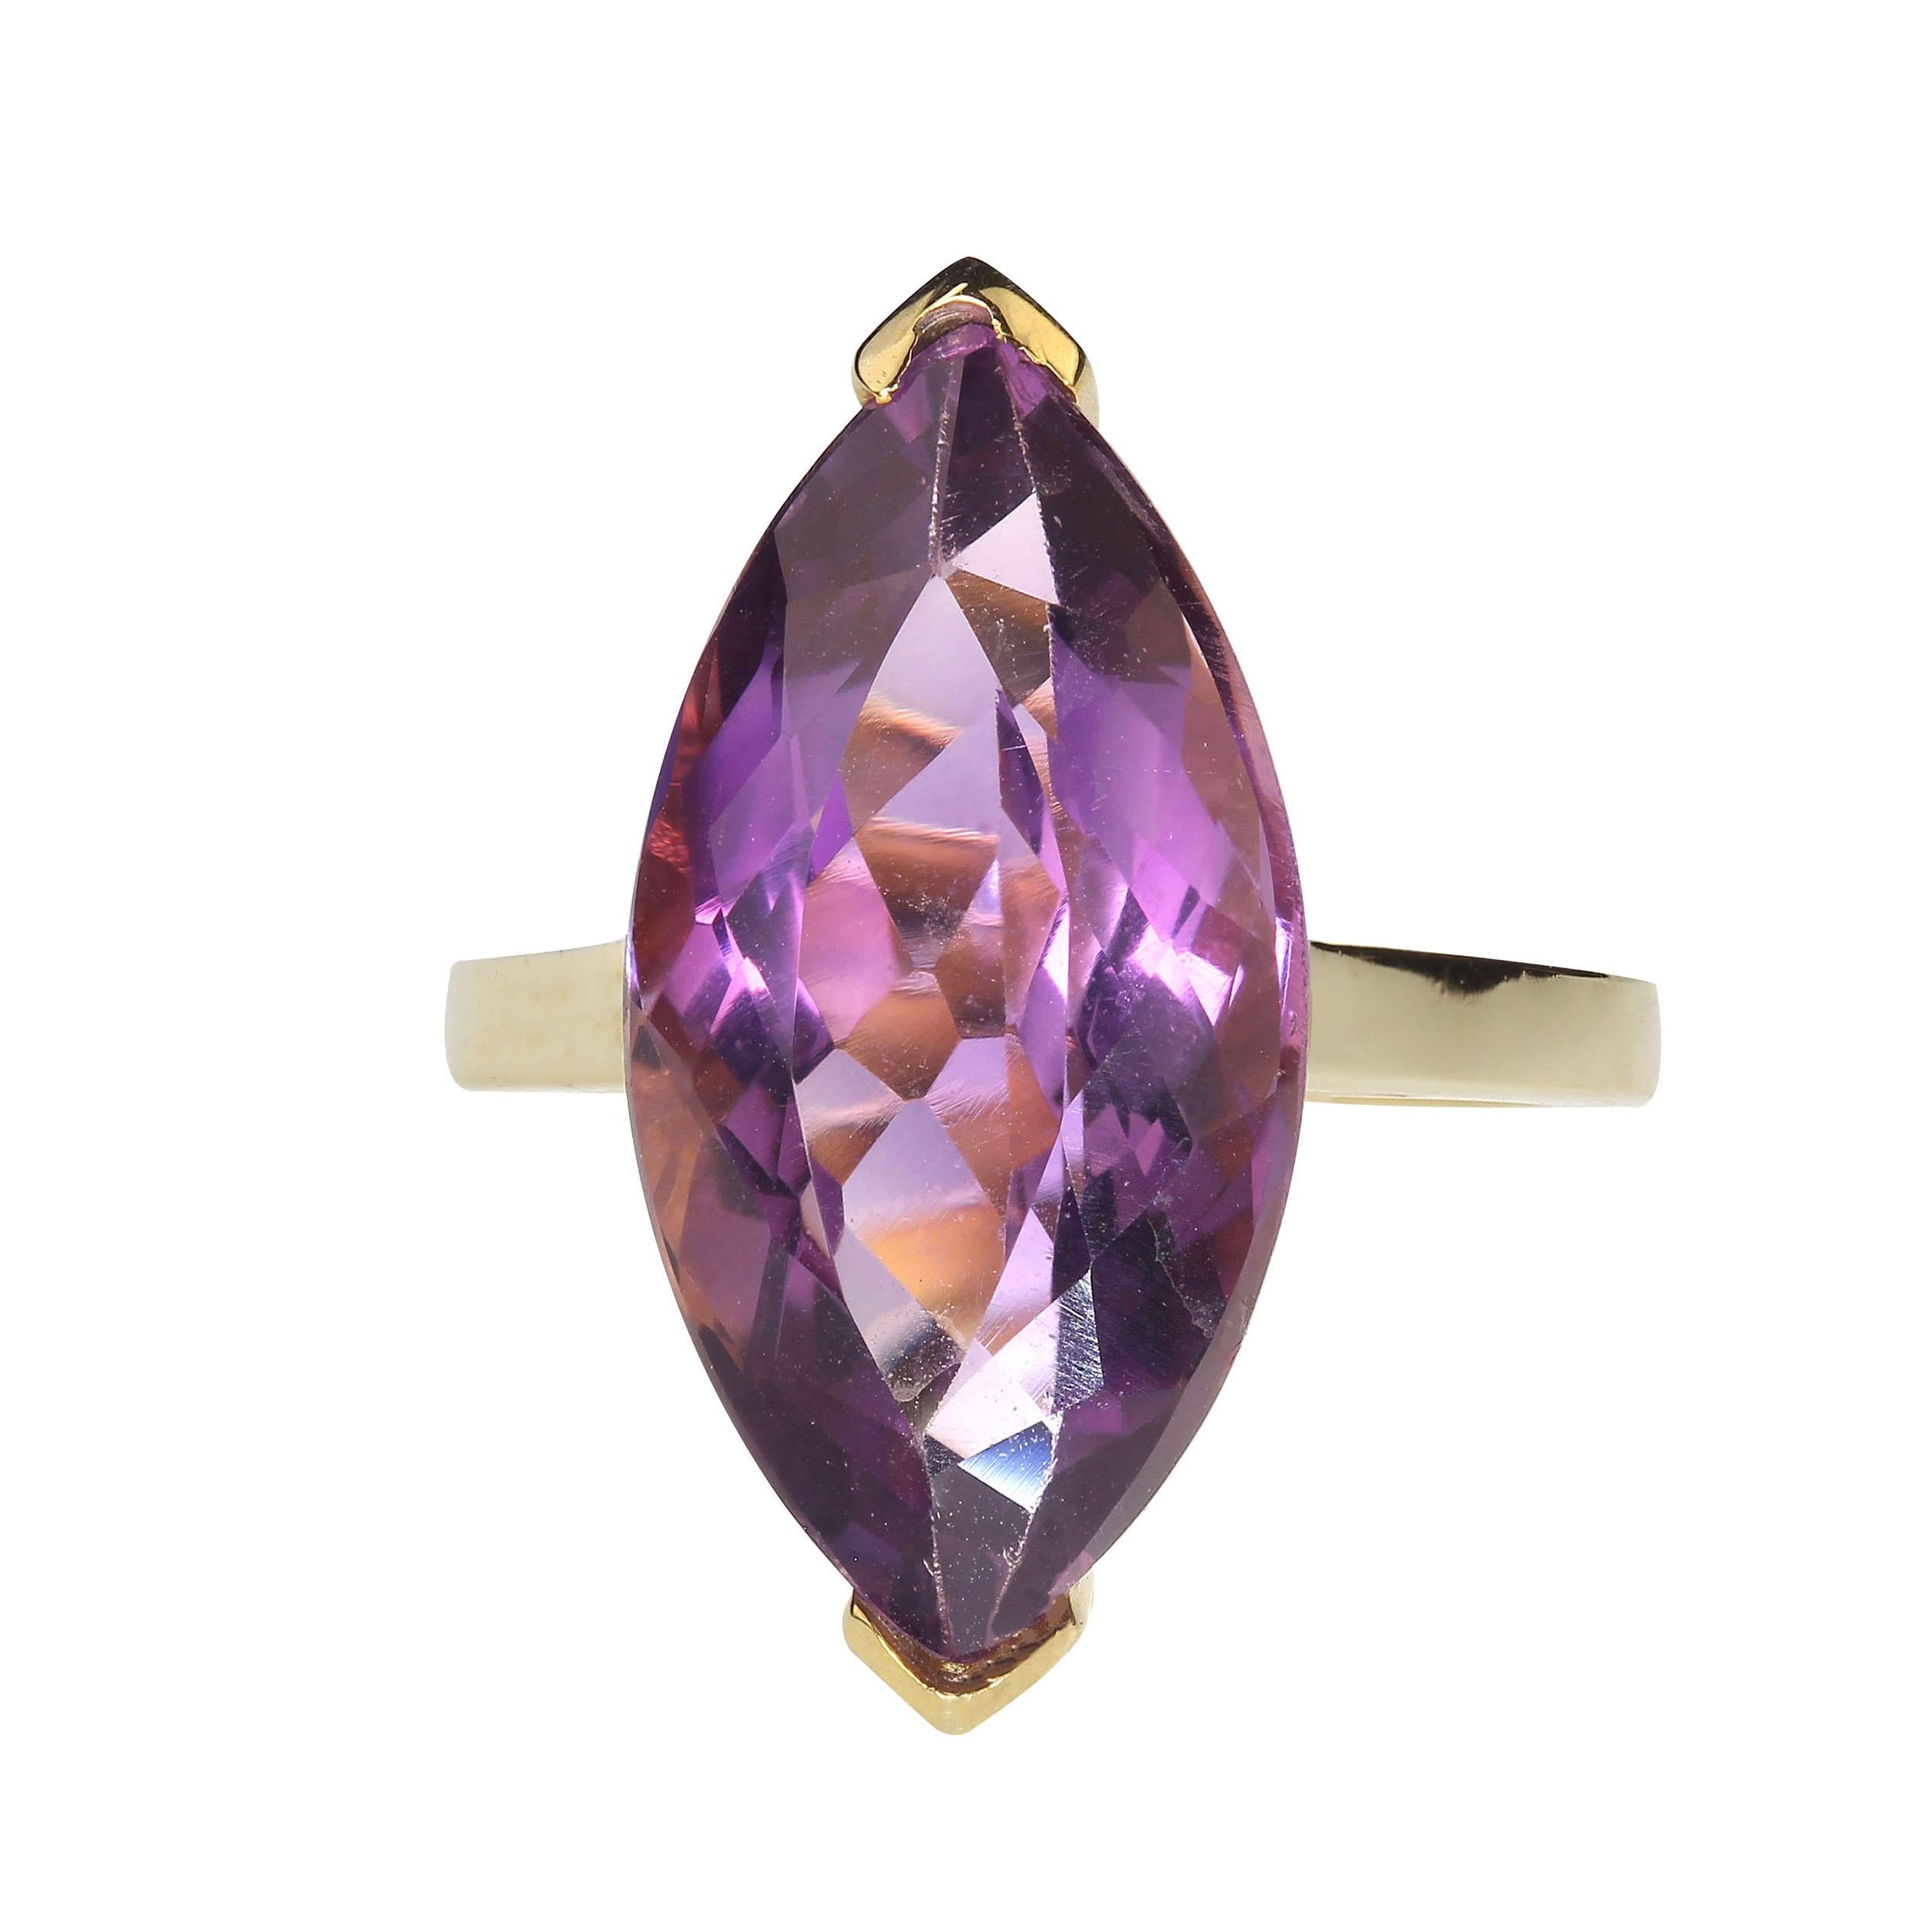 Marvelous marquise shaped 13.71ct Amethyst in gold rhodium over Sterling Silver ring. This lovely amethyst comes to us straight from one of our favorite Brazilian vendors.  It is perfectly set with the end tips protected and the sides open to the